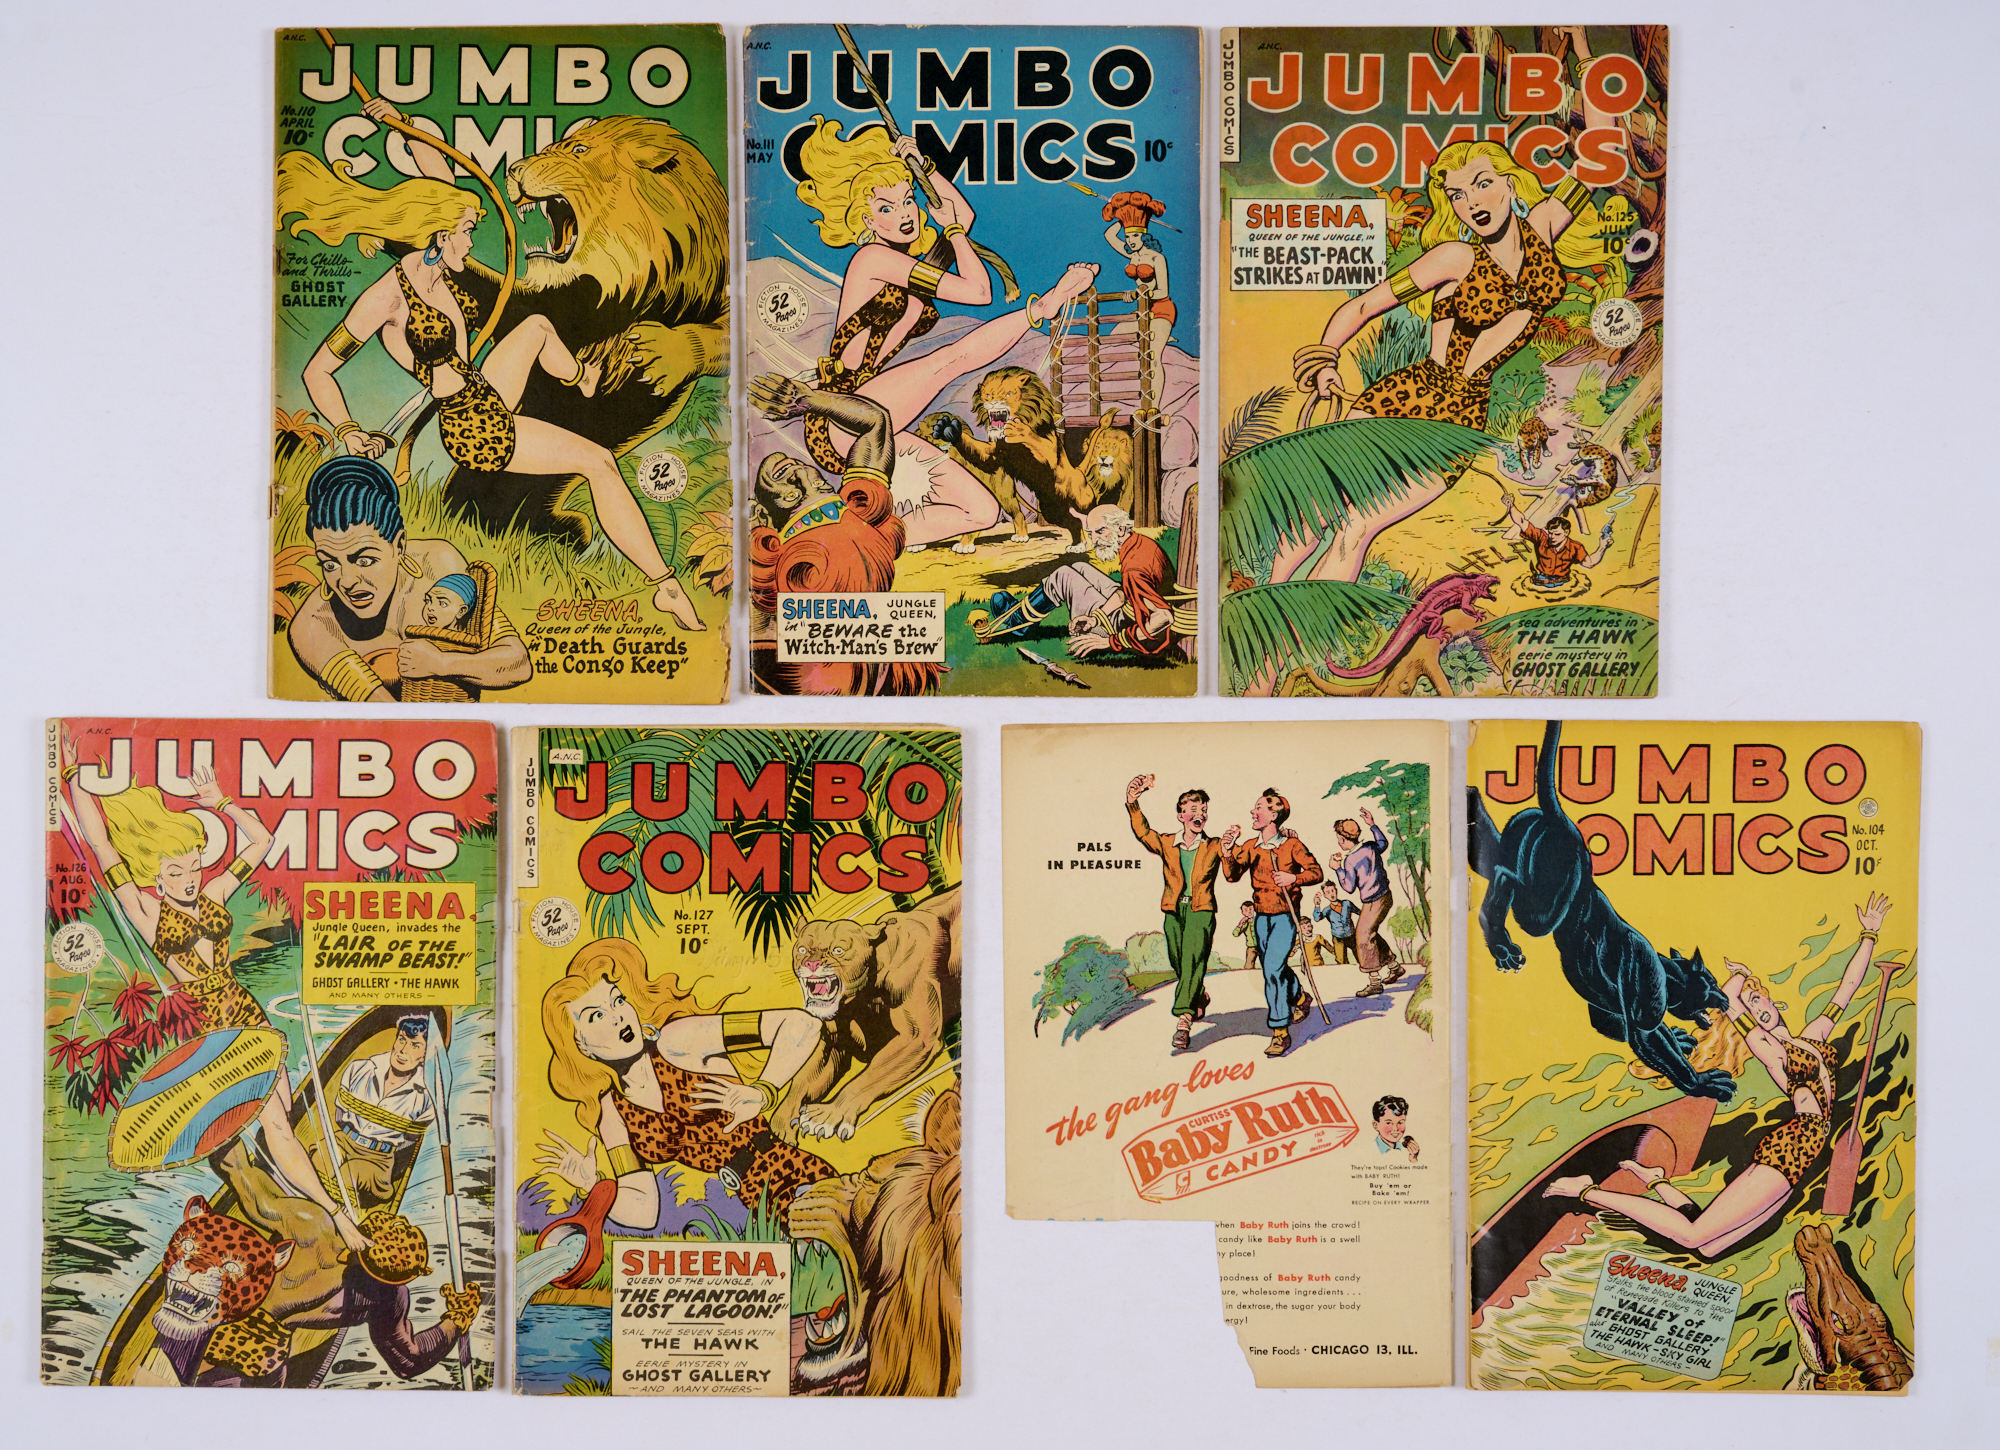 Jumbo Comics (1947-49) 110, 111, 125-127 and 104. # 104 back cover competition cut-out [gd], balance